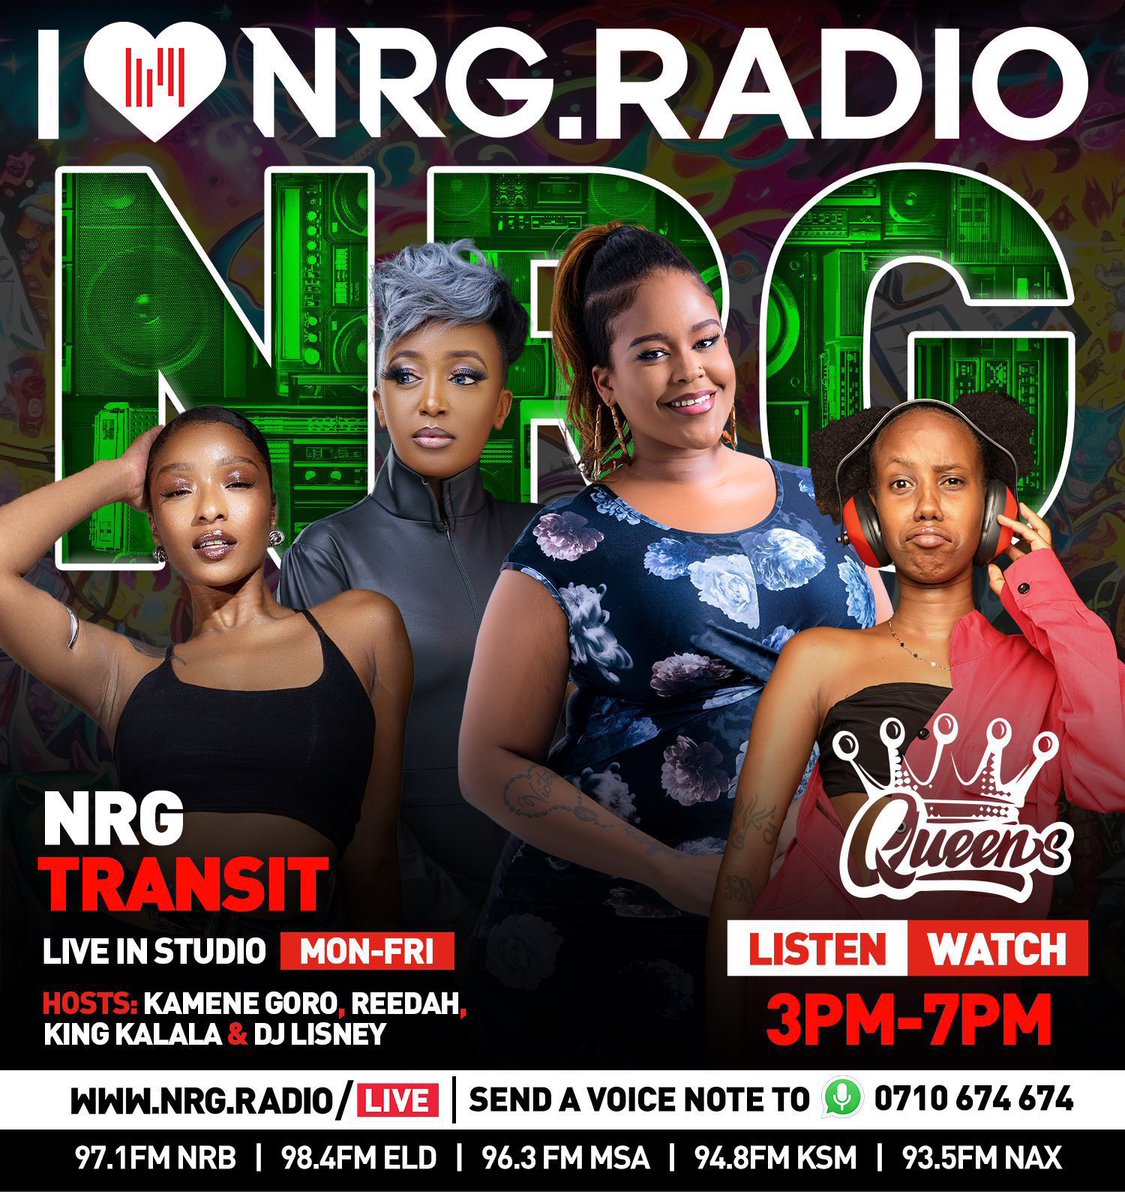 It’s a WCW today and of course wishing Happy Eid al-Fitr to all our Muslim brother and sisters,Tune in to the Transit Queen show from 3pm-7pm 😍😍 @djlisney @KameneGoro @KING__KALALA @reedahyvonne #NRGTransitQueens #NRGRadioKenya #NRGTransit